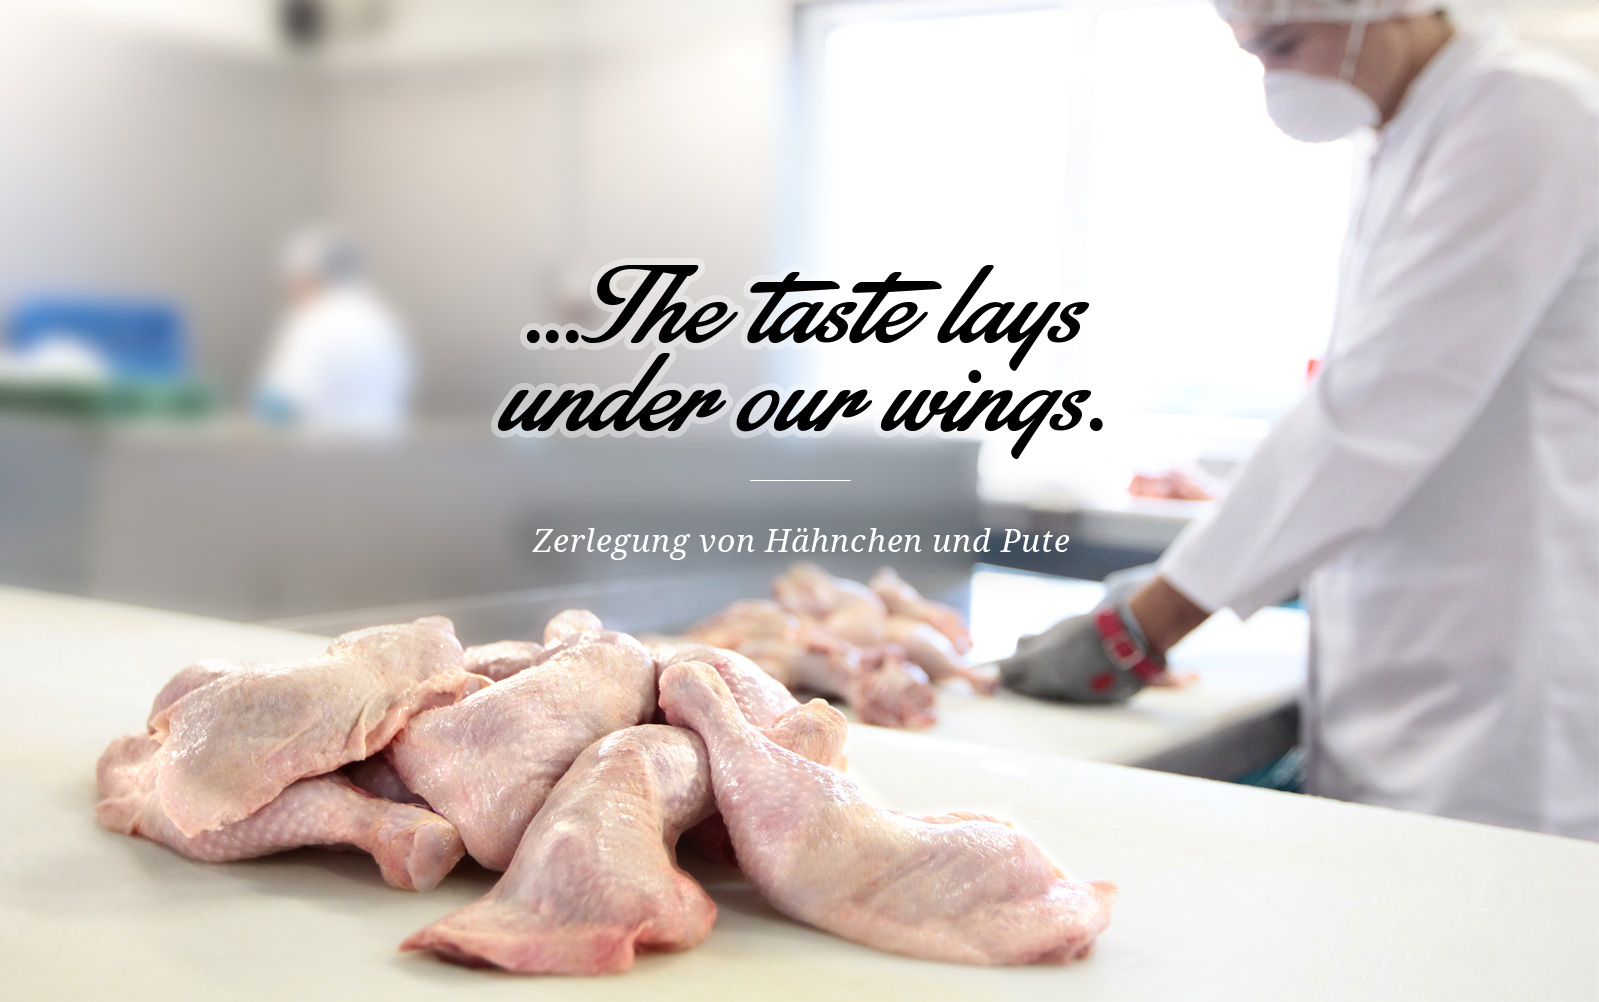 The taste lays under our wings.